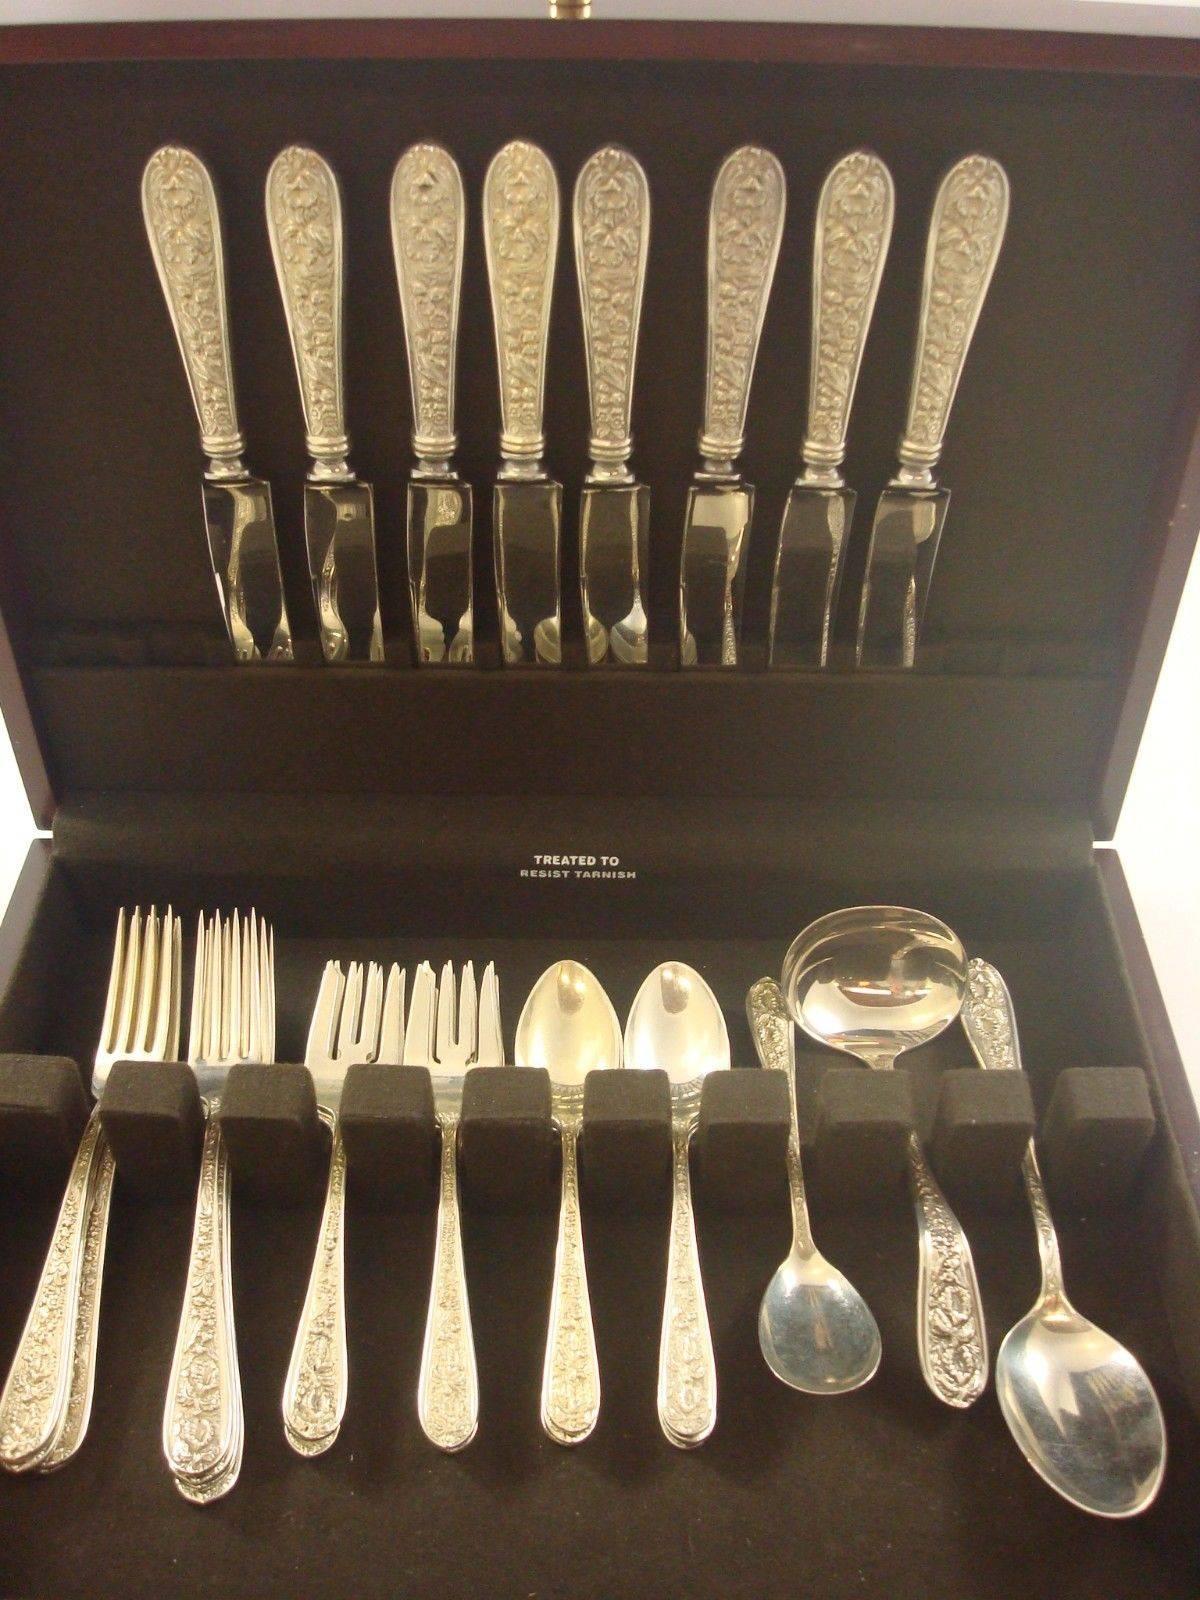 Corsage by Stieff Sterling Silver Flatware set - 35 Pieces. This set includes: 

8 KNIVES, 9